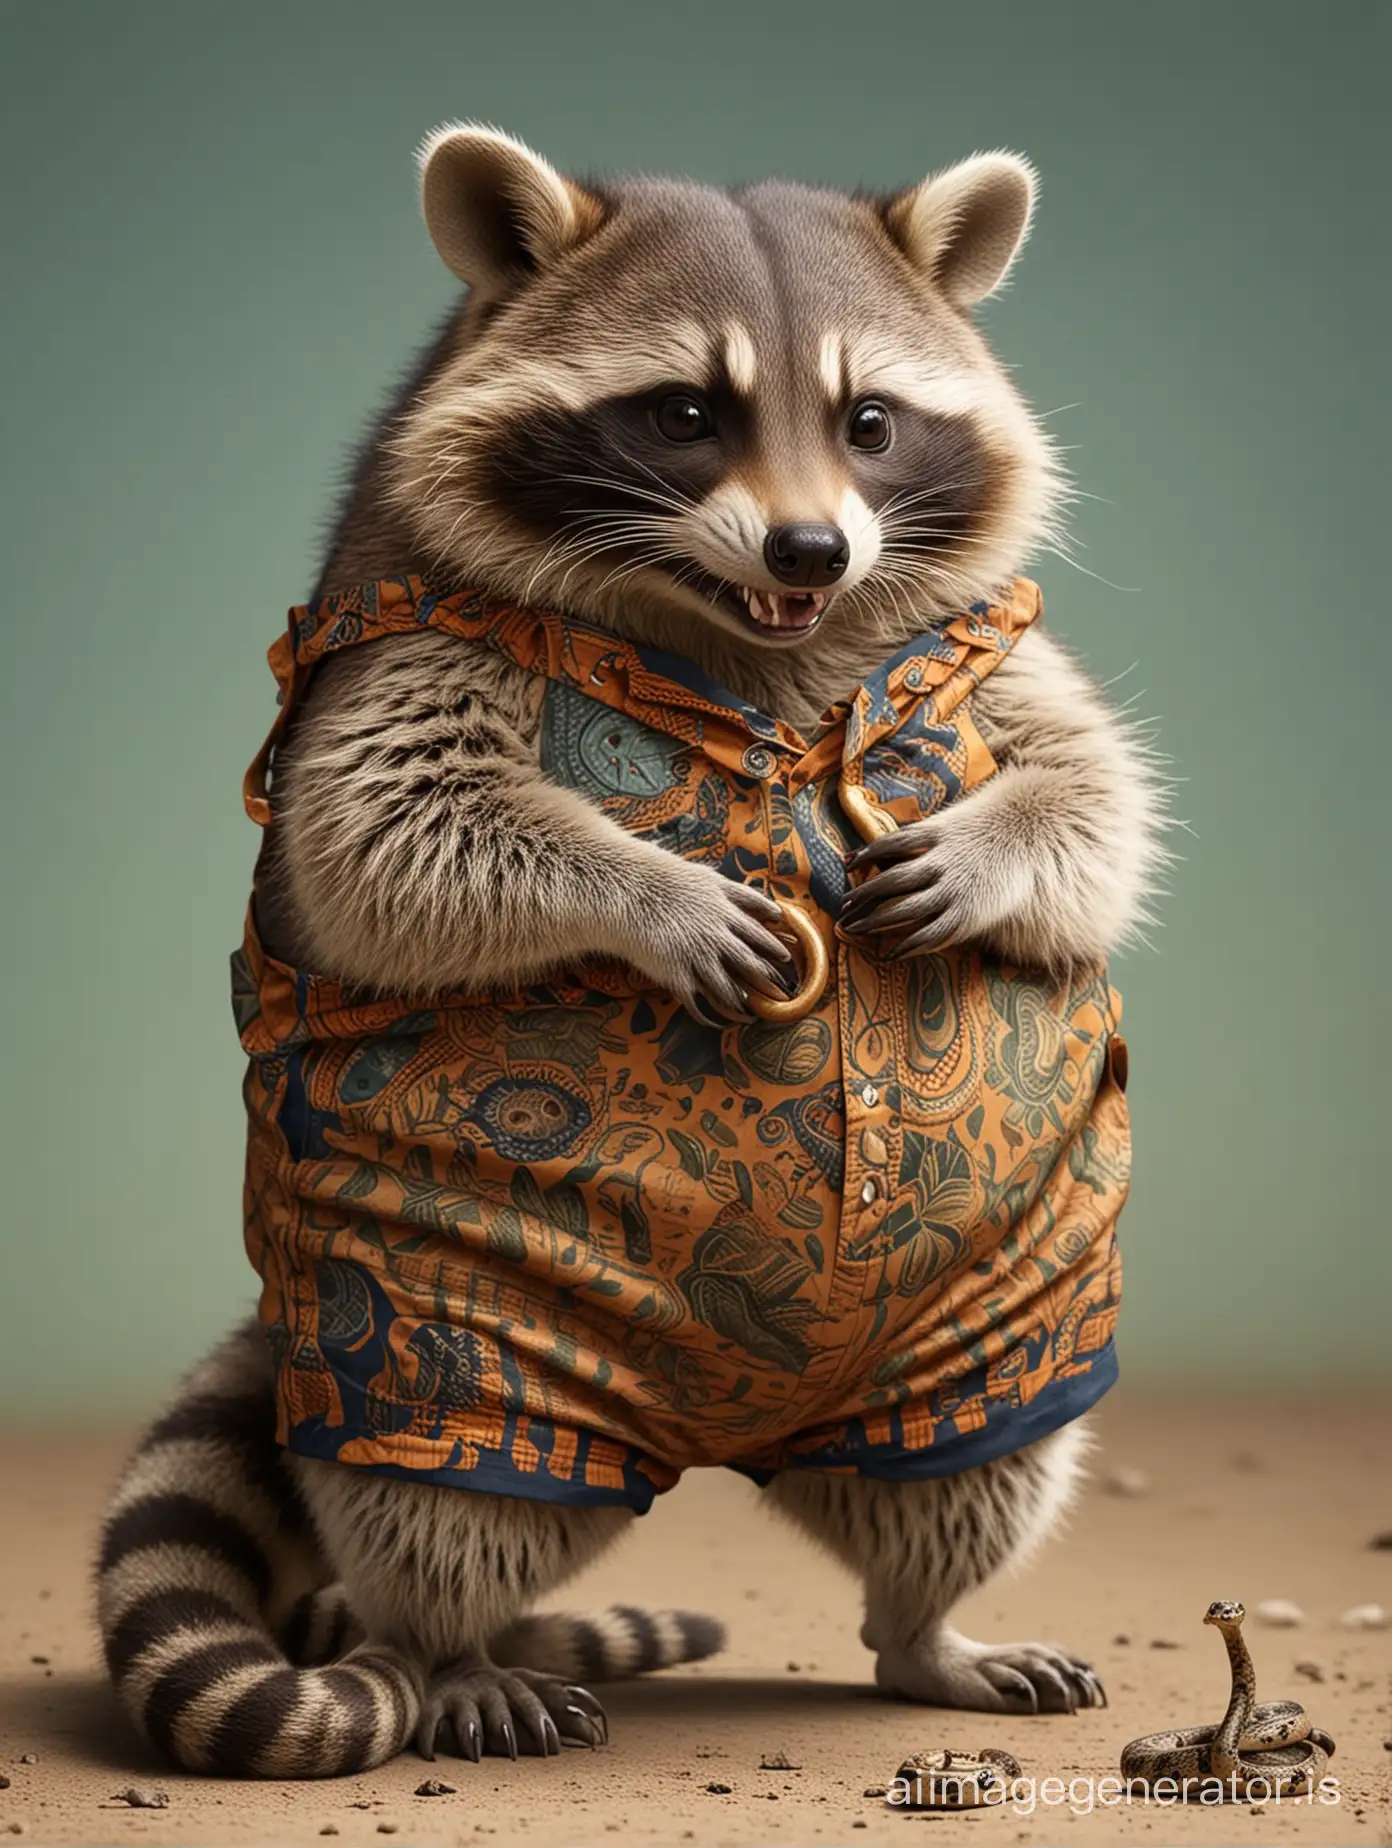 a fat raccoon in shorts with a hole in his butt lovingly hugs a snake that hisses and resists